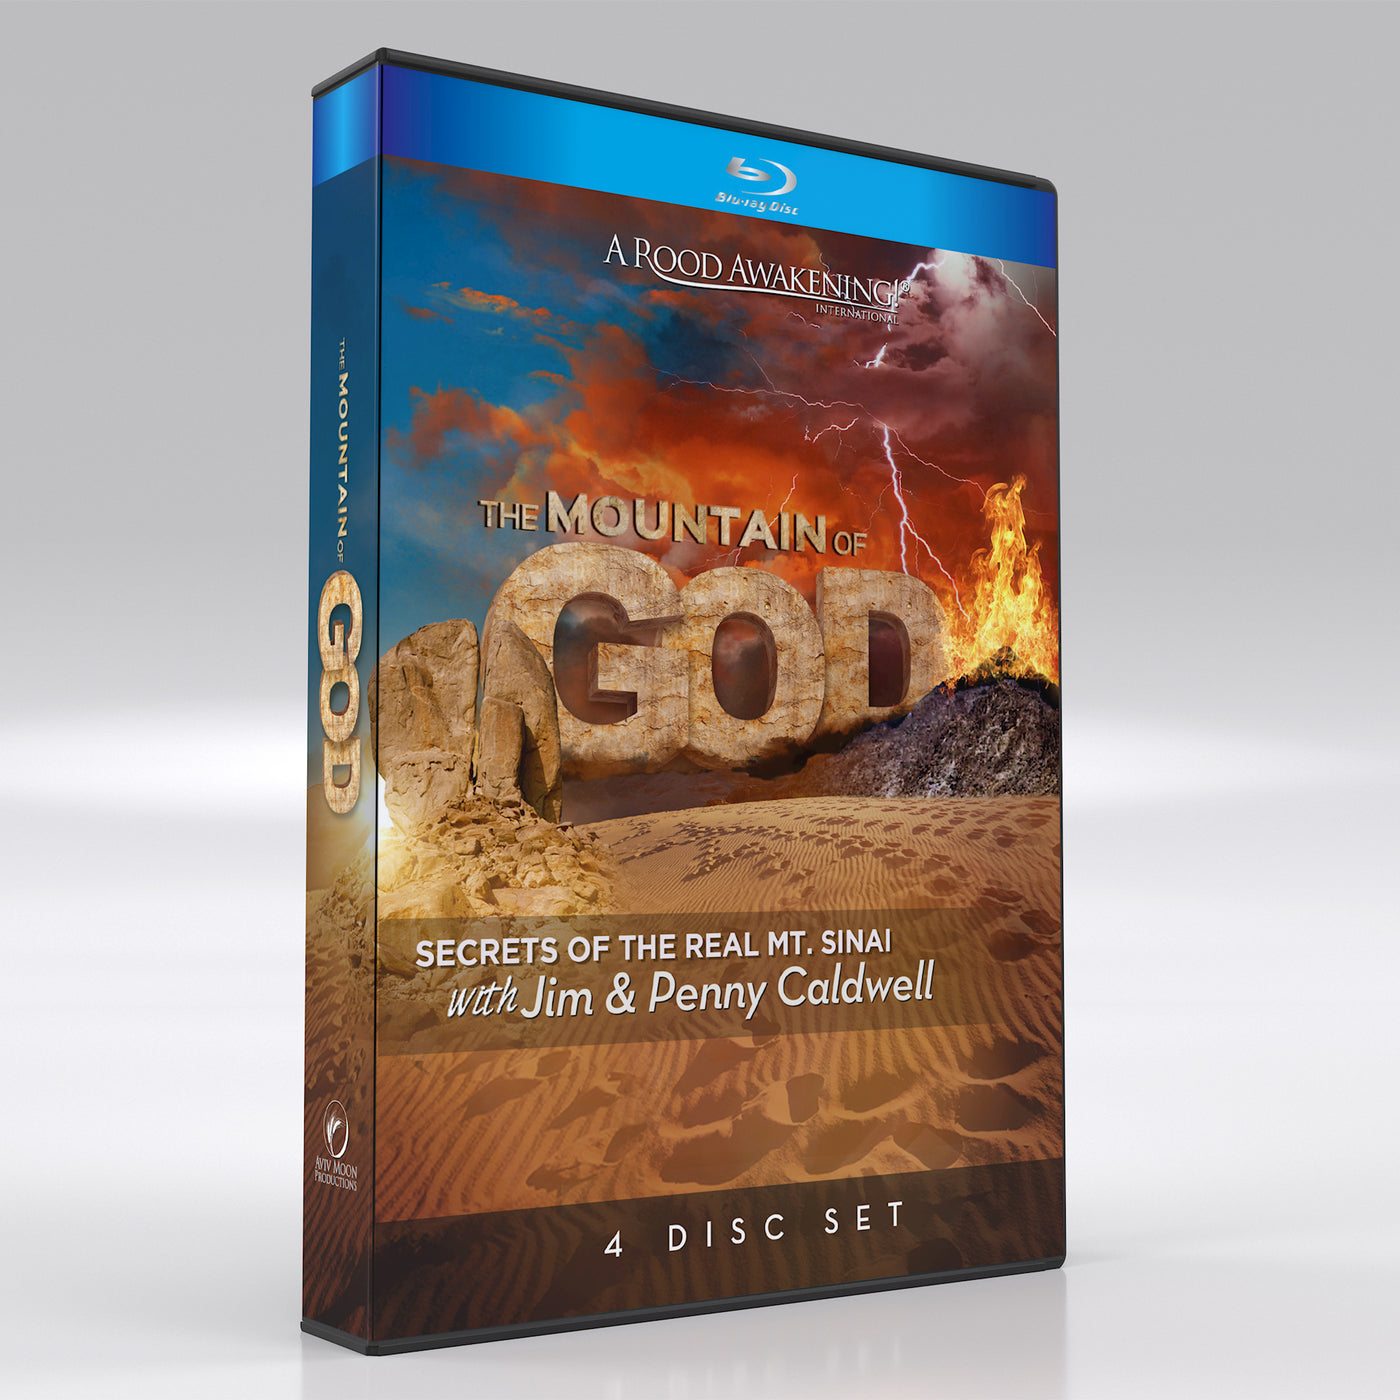 The Mountain of God - Secrets of The Real Mt. Sinai